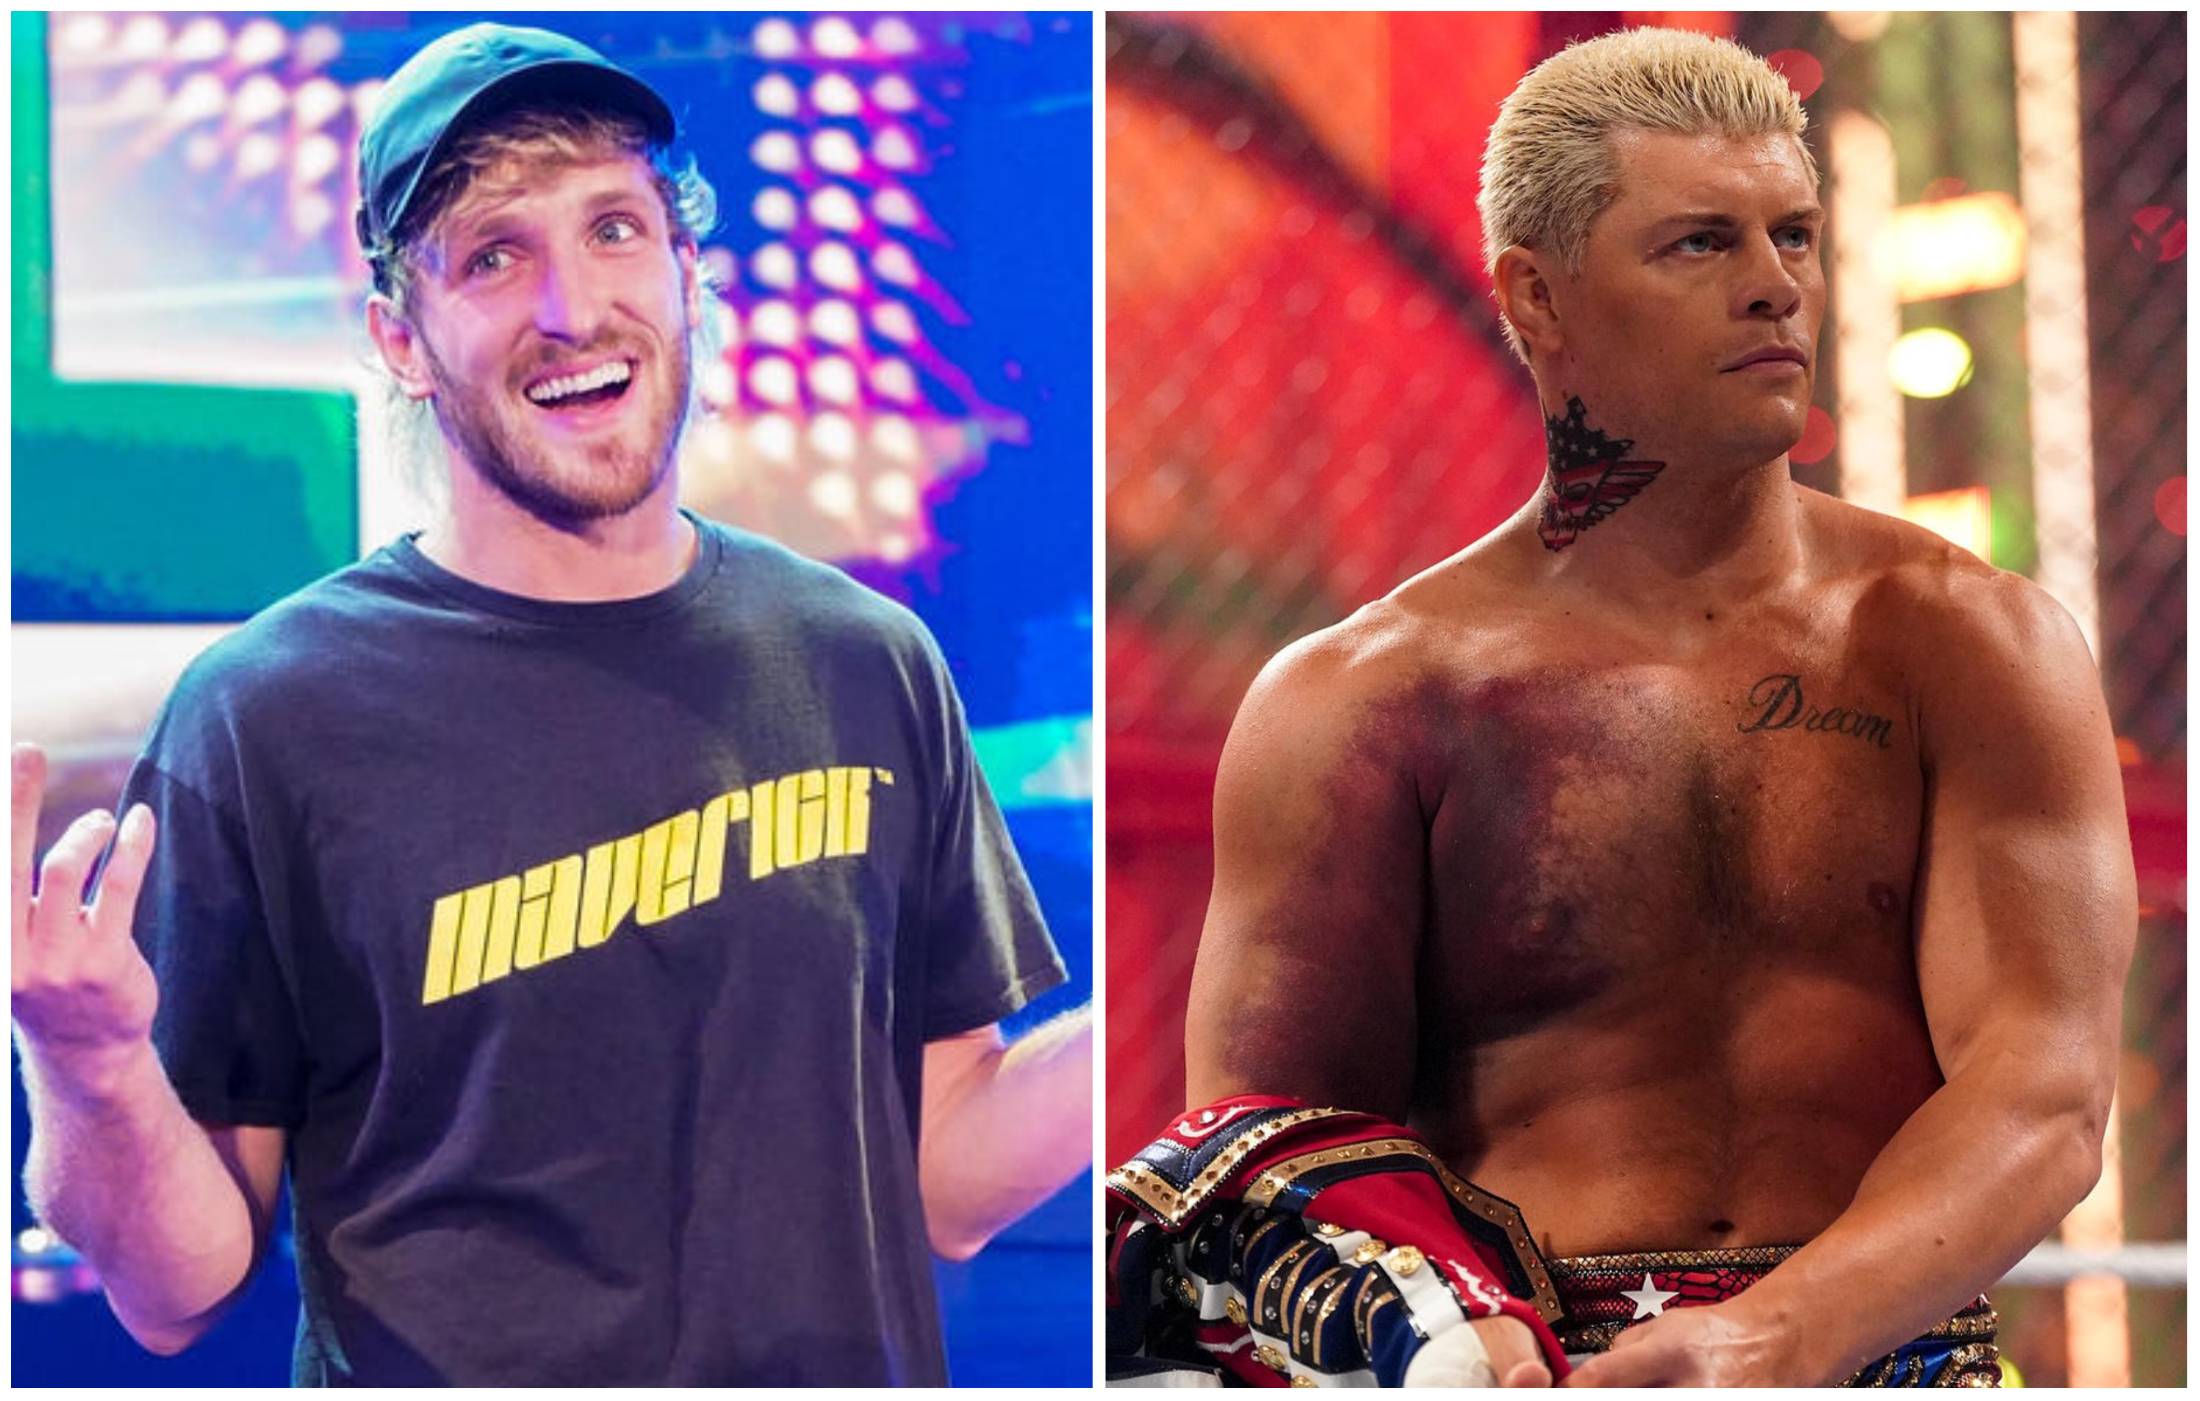 Both Logan Paul and Cody Rhodes haven't lost a match so far in 2022